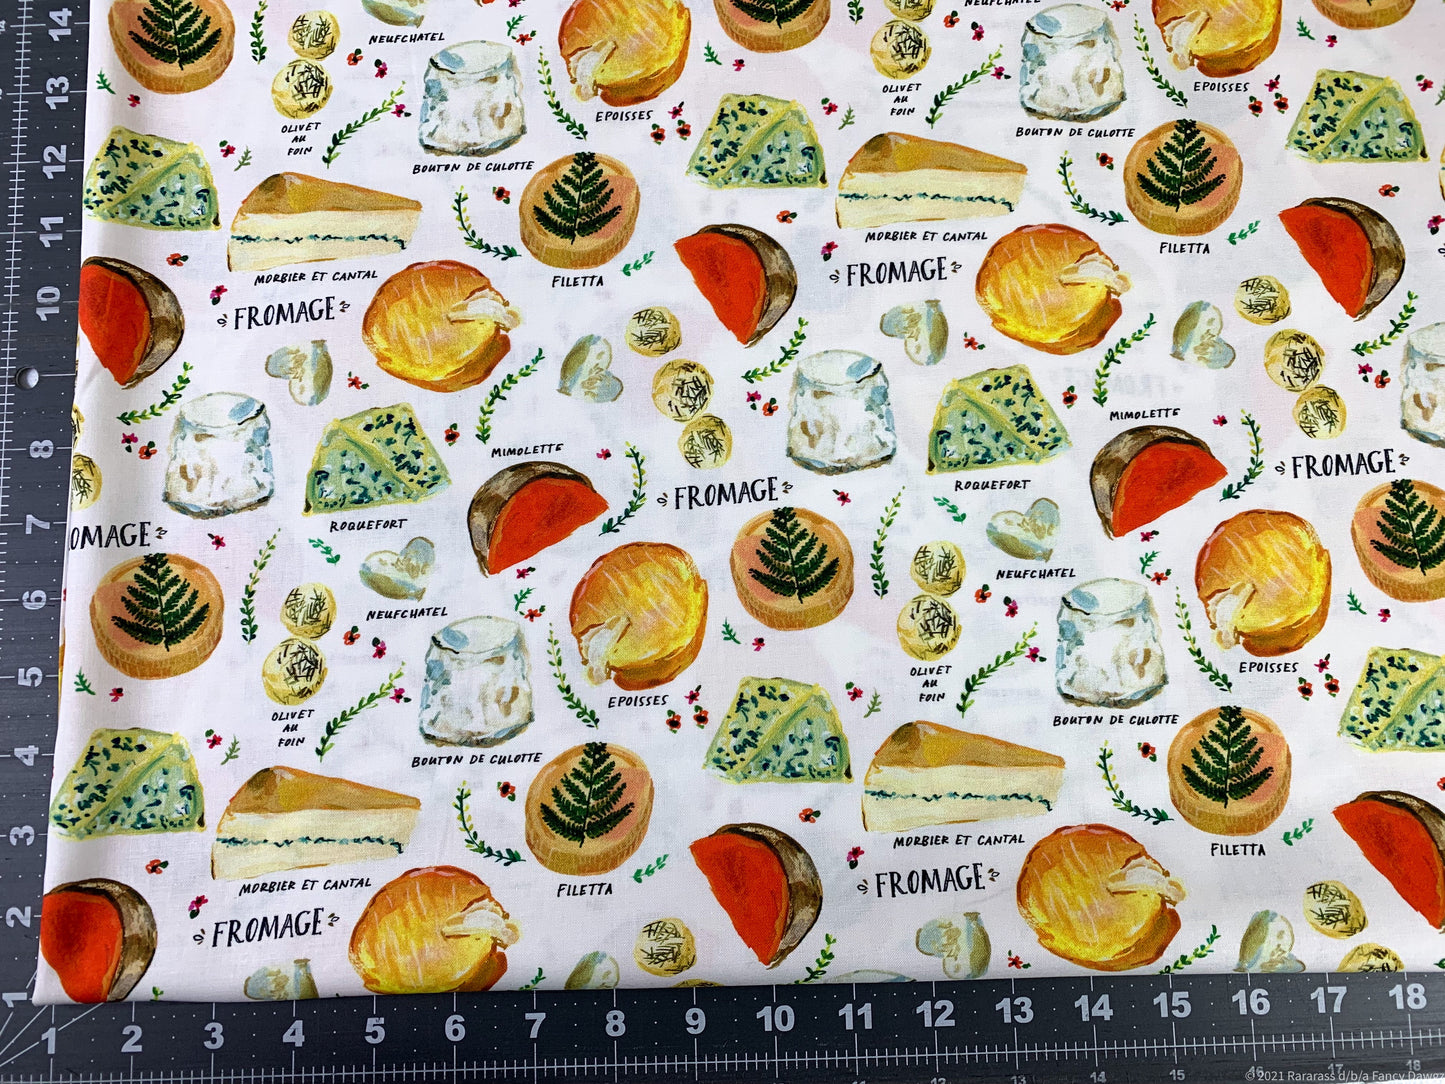 Fromage Cheese fabric DAW1656 Cream background